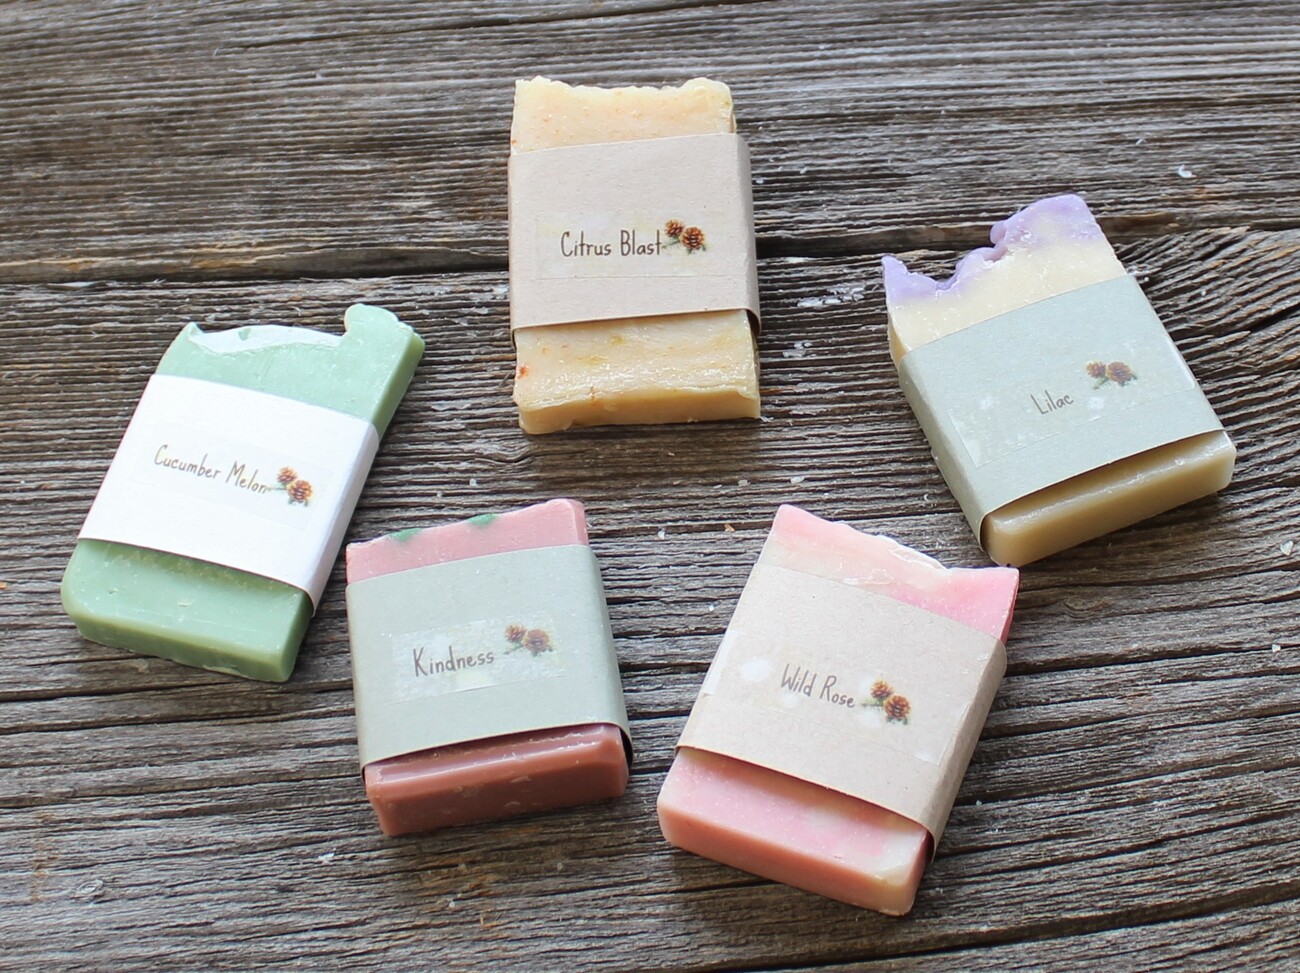 Scented soaps as a Mother's Day gift